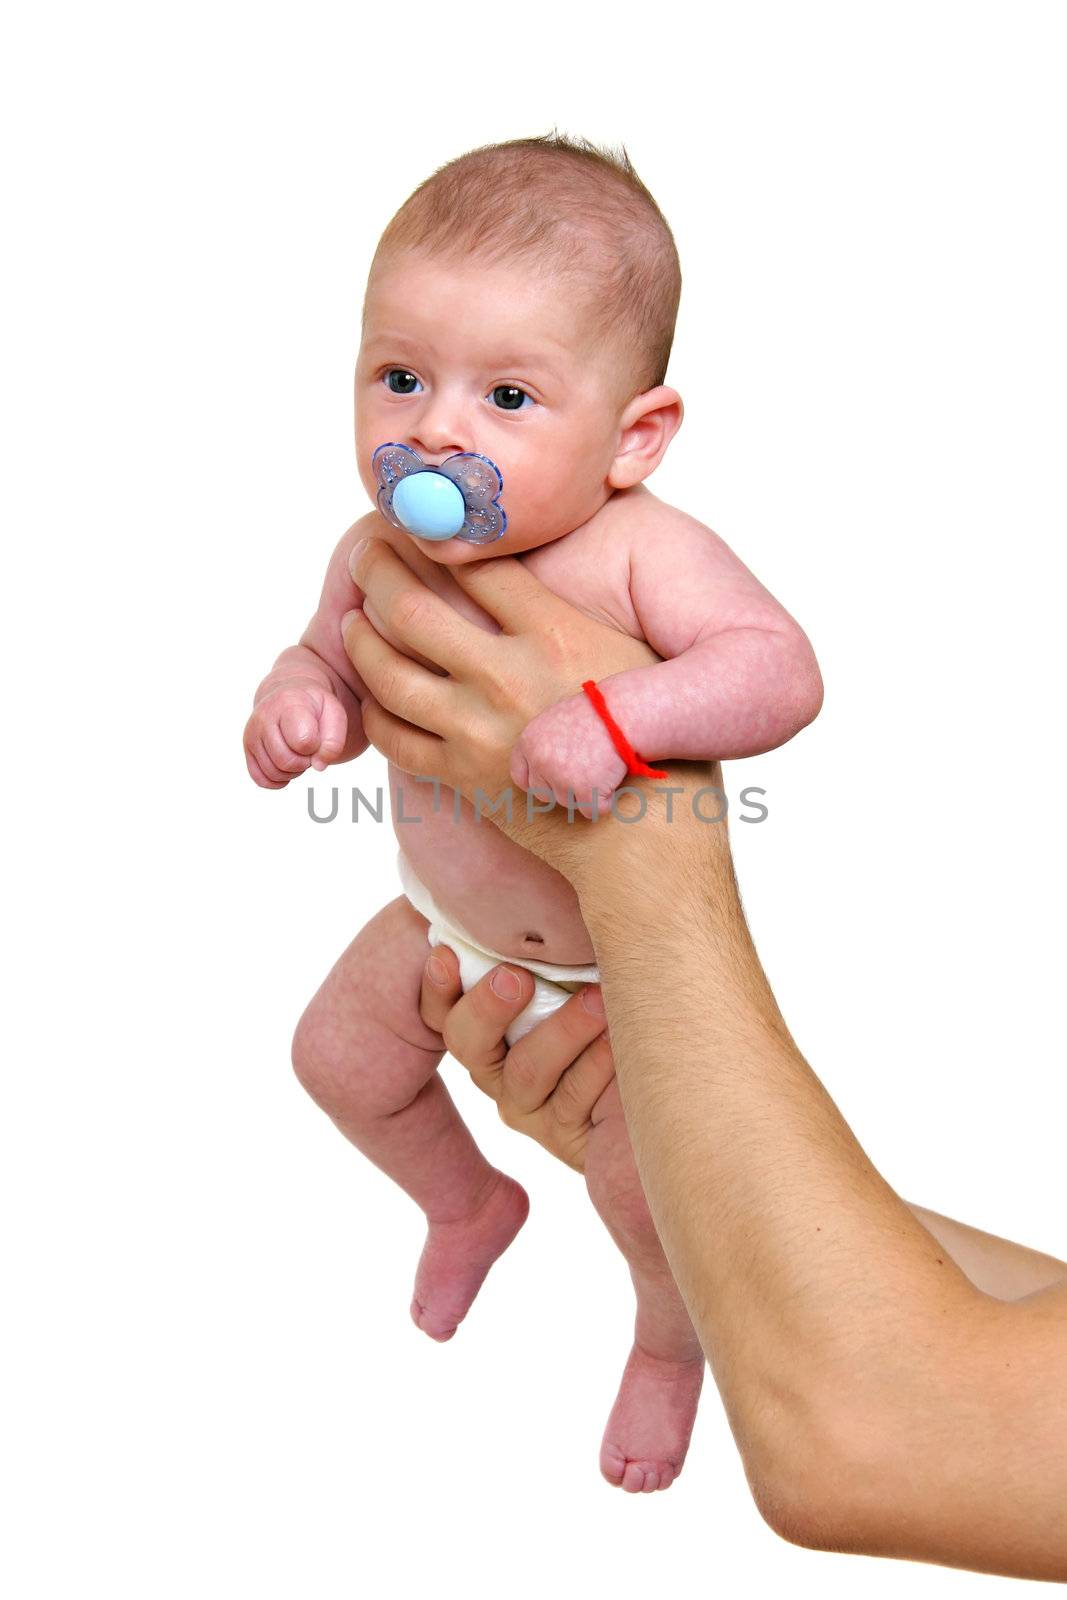 Infant baby isolated on white held by his dad